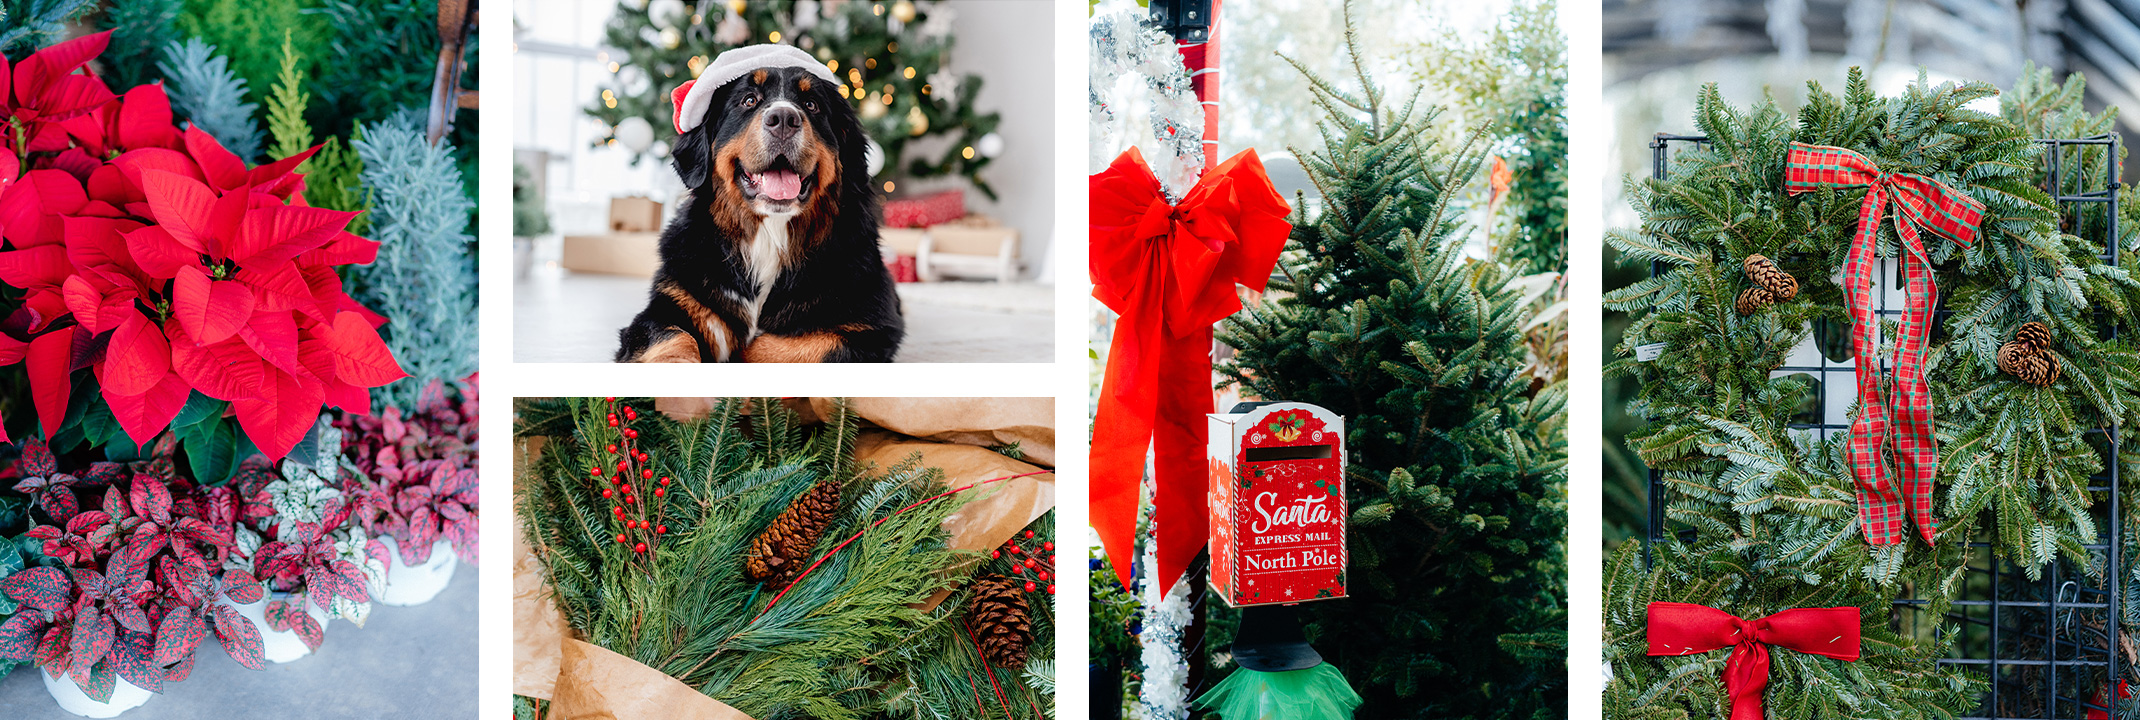 Poinsettias, small rosemary trees and other plants, a dog in front of Christmas tree, Christmas greens in a paper sleeve, a Christmas tree, bow and box for letters to Santa, and Christmas Wreaths.